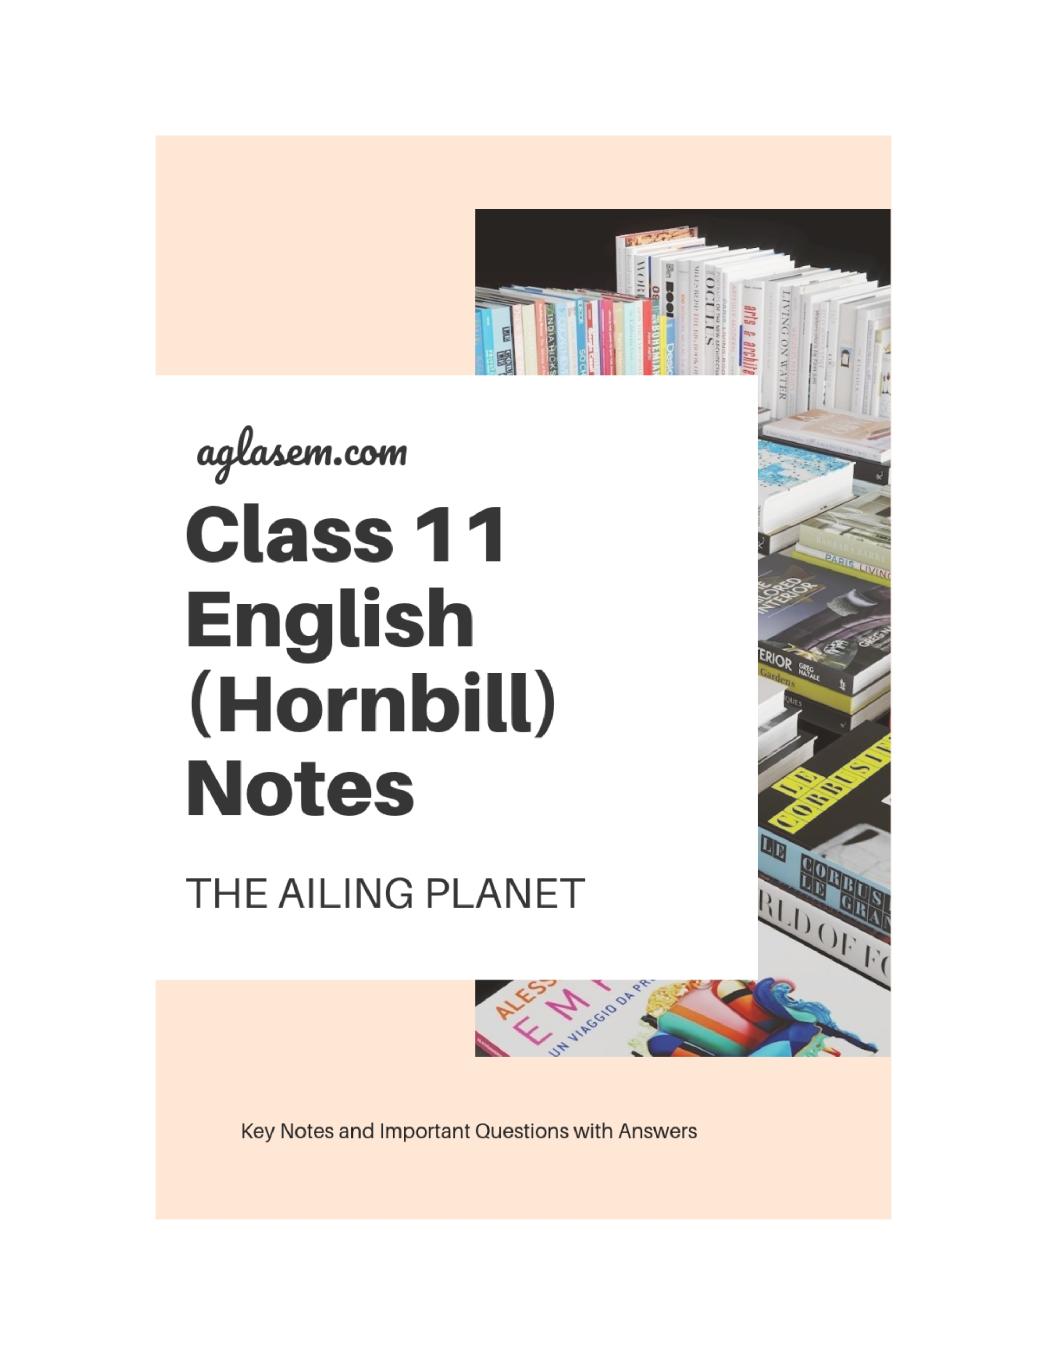 Class 11 English Hornbill Notes For The Ailing Planet the Green Movement’s Role - Page 1